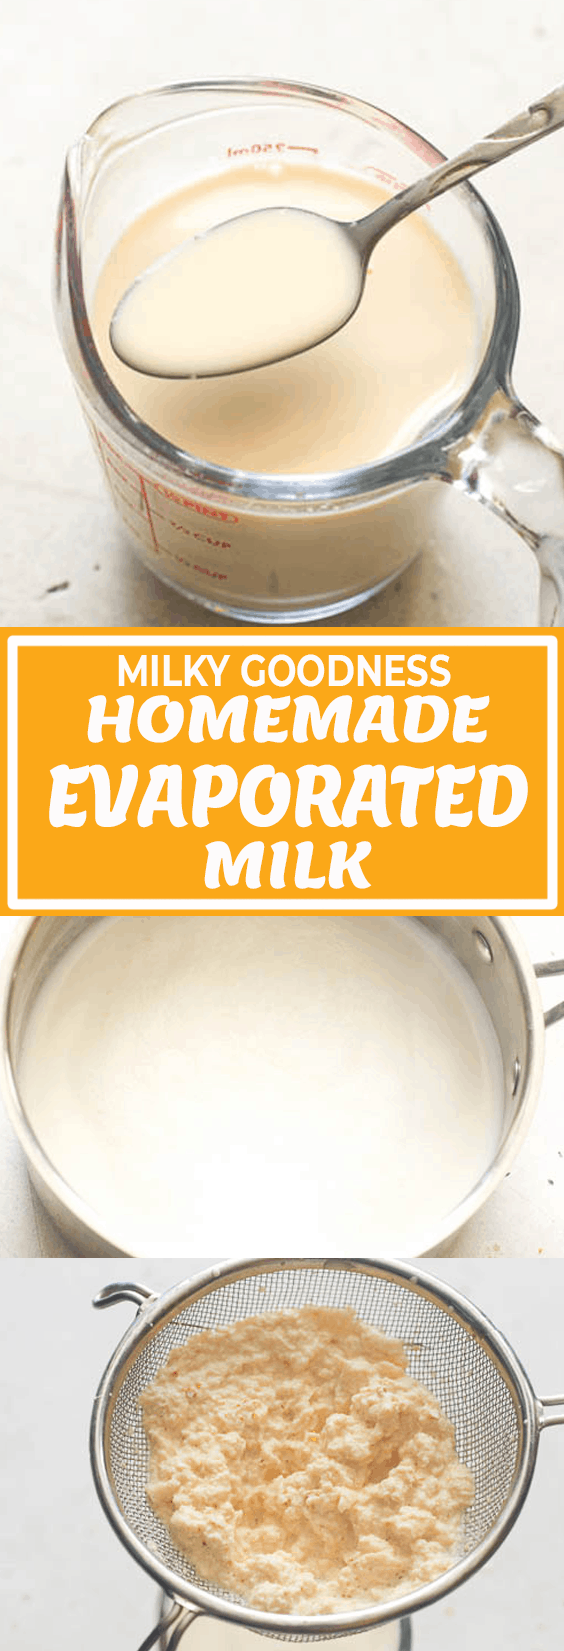 How To Make Evaporated Milk